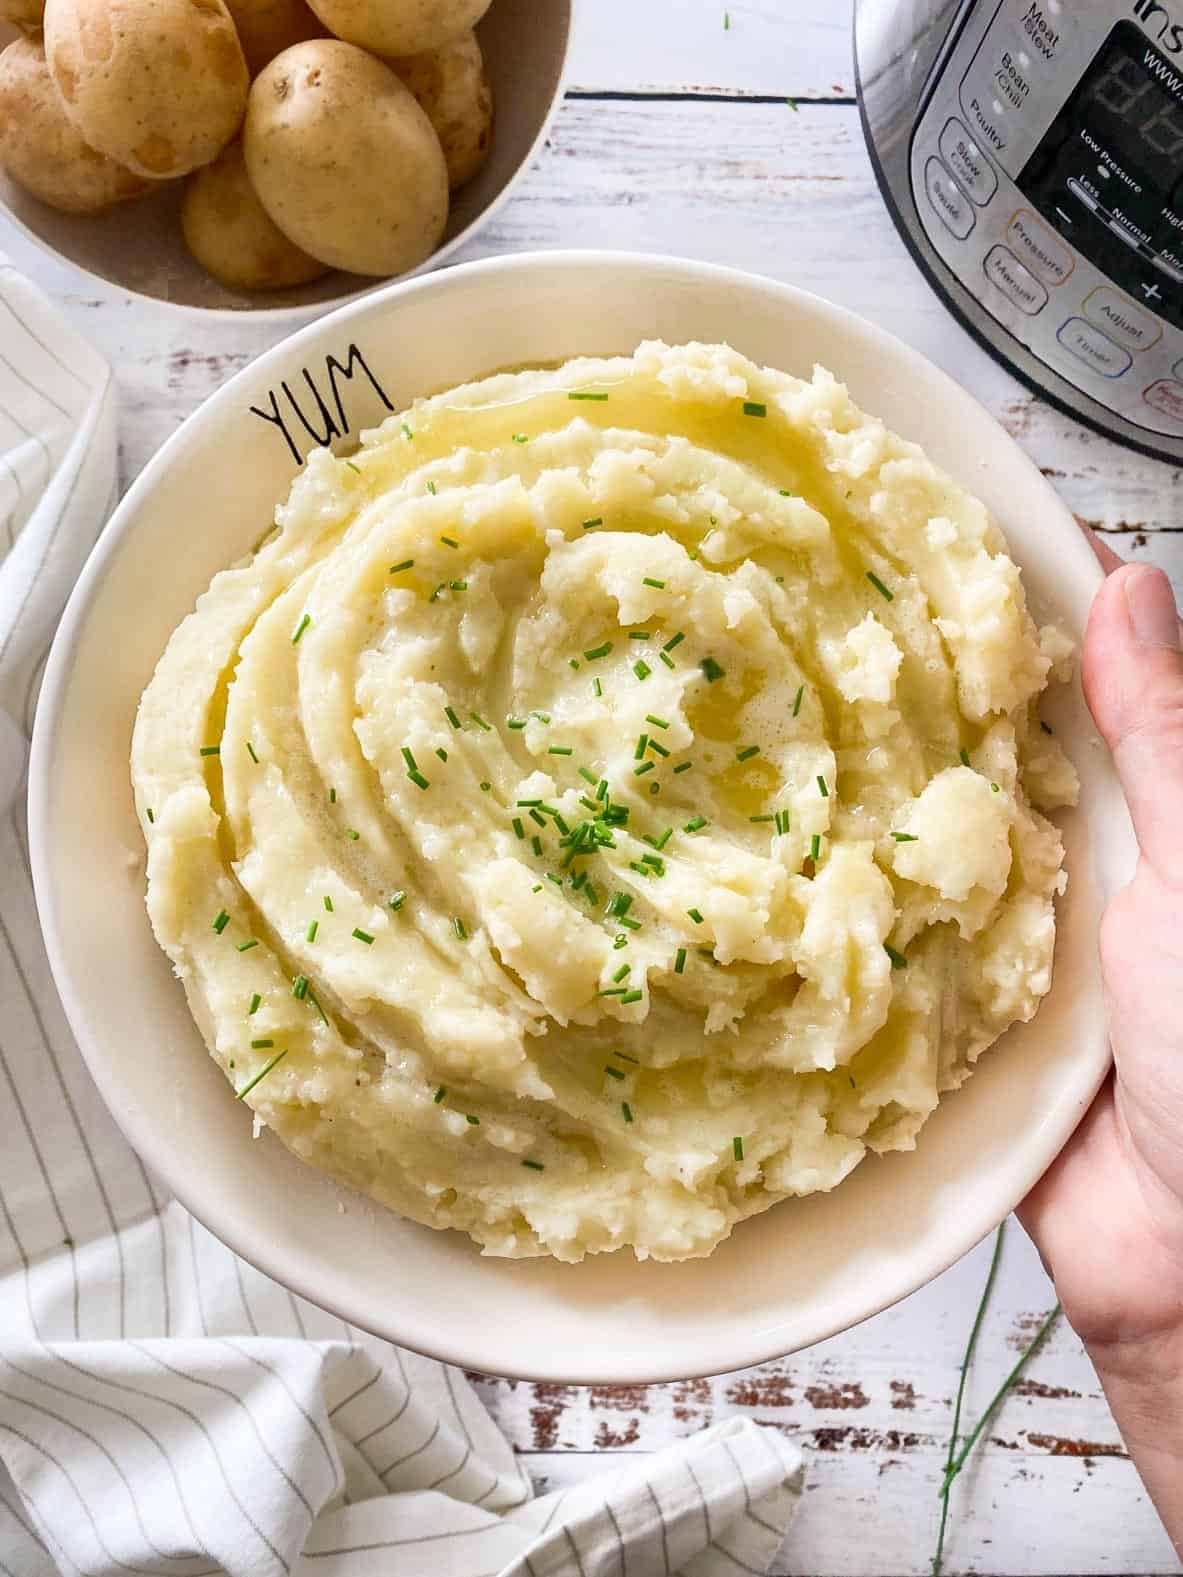 Hand holding up large plate of mashed potatoes with chives garnished on top.